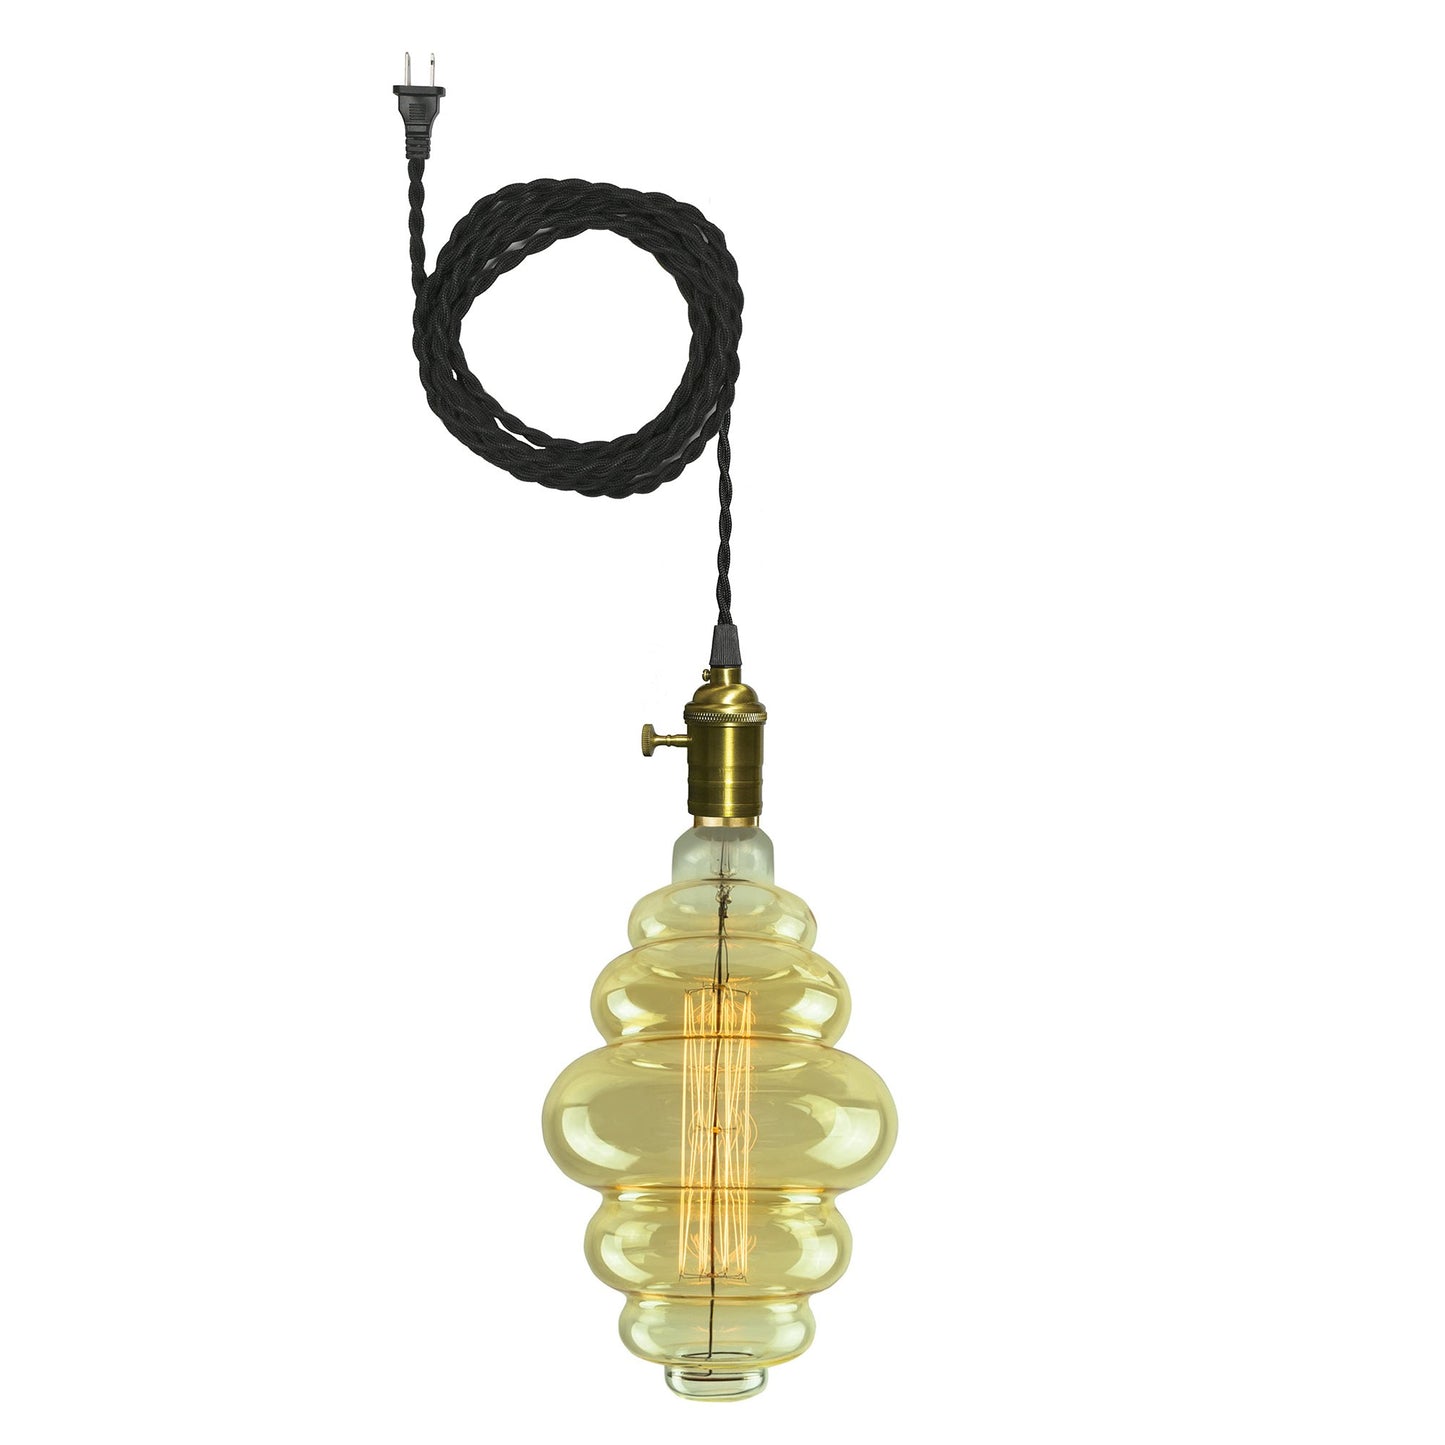 BULBRITE FIXTURES PLUG IN PENDANT KIT VINTAGE BRONZE SOCKET WITH BLACK CORD AND INCANDESCENT BH MEDIUM SCREW (E26) 60W DIMMABLE ANTIQUE LIGHT BULB 2200K/AMBER 1PK (810013)